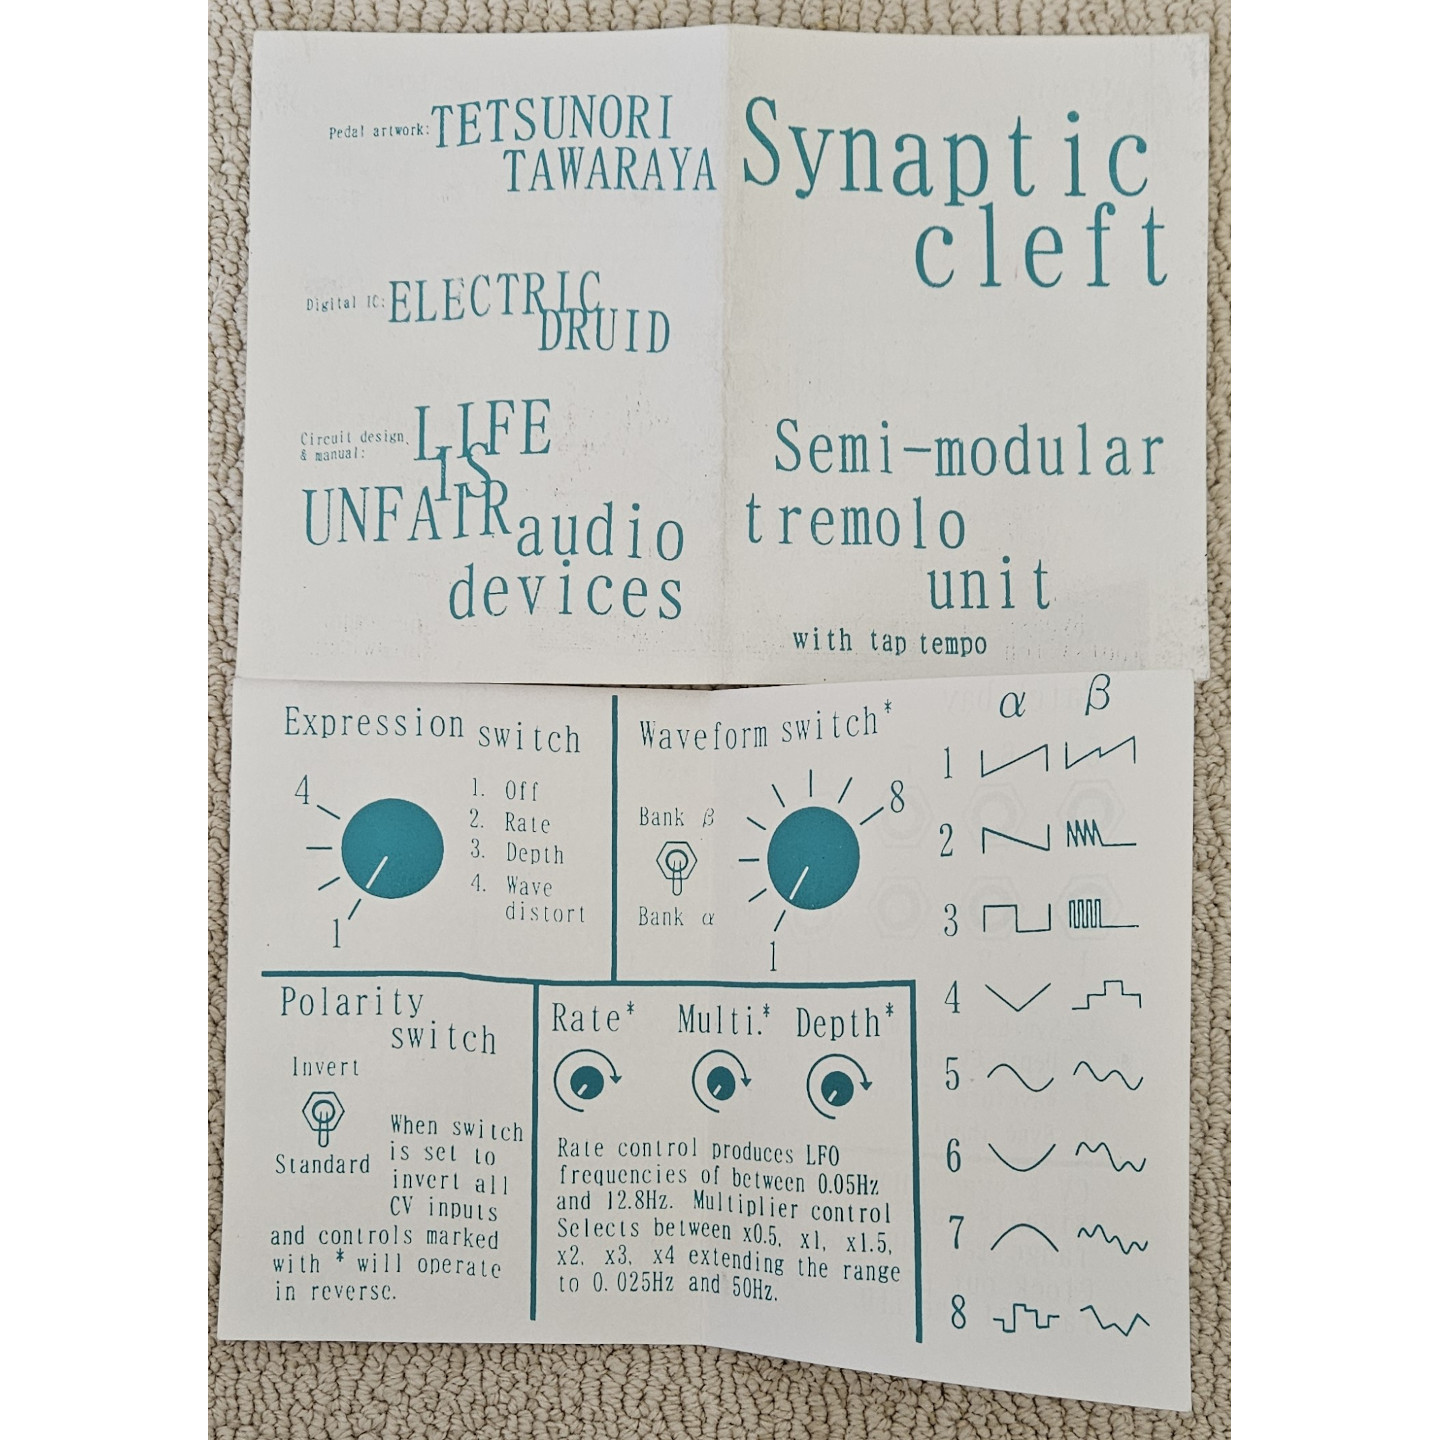 Life is Unfair Audio Synaptic Cleft Semi-Modular Tremolo Unit Guitar Effects Pedal